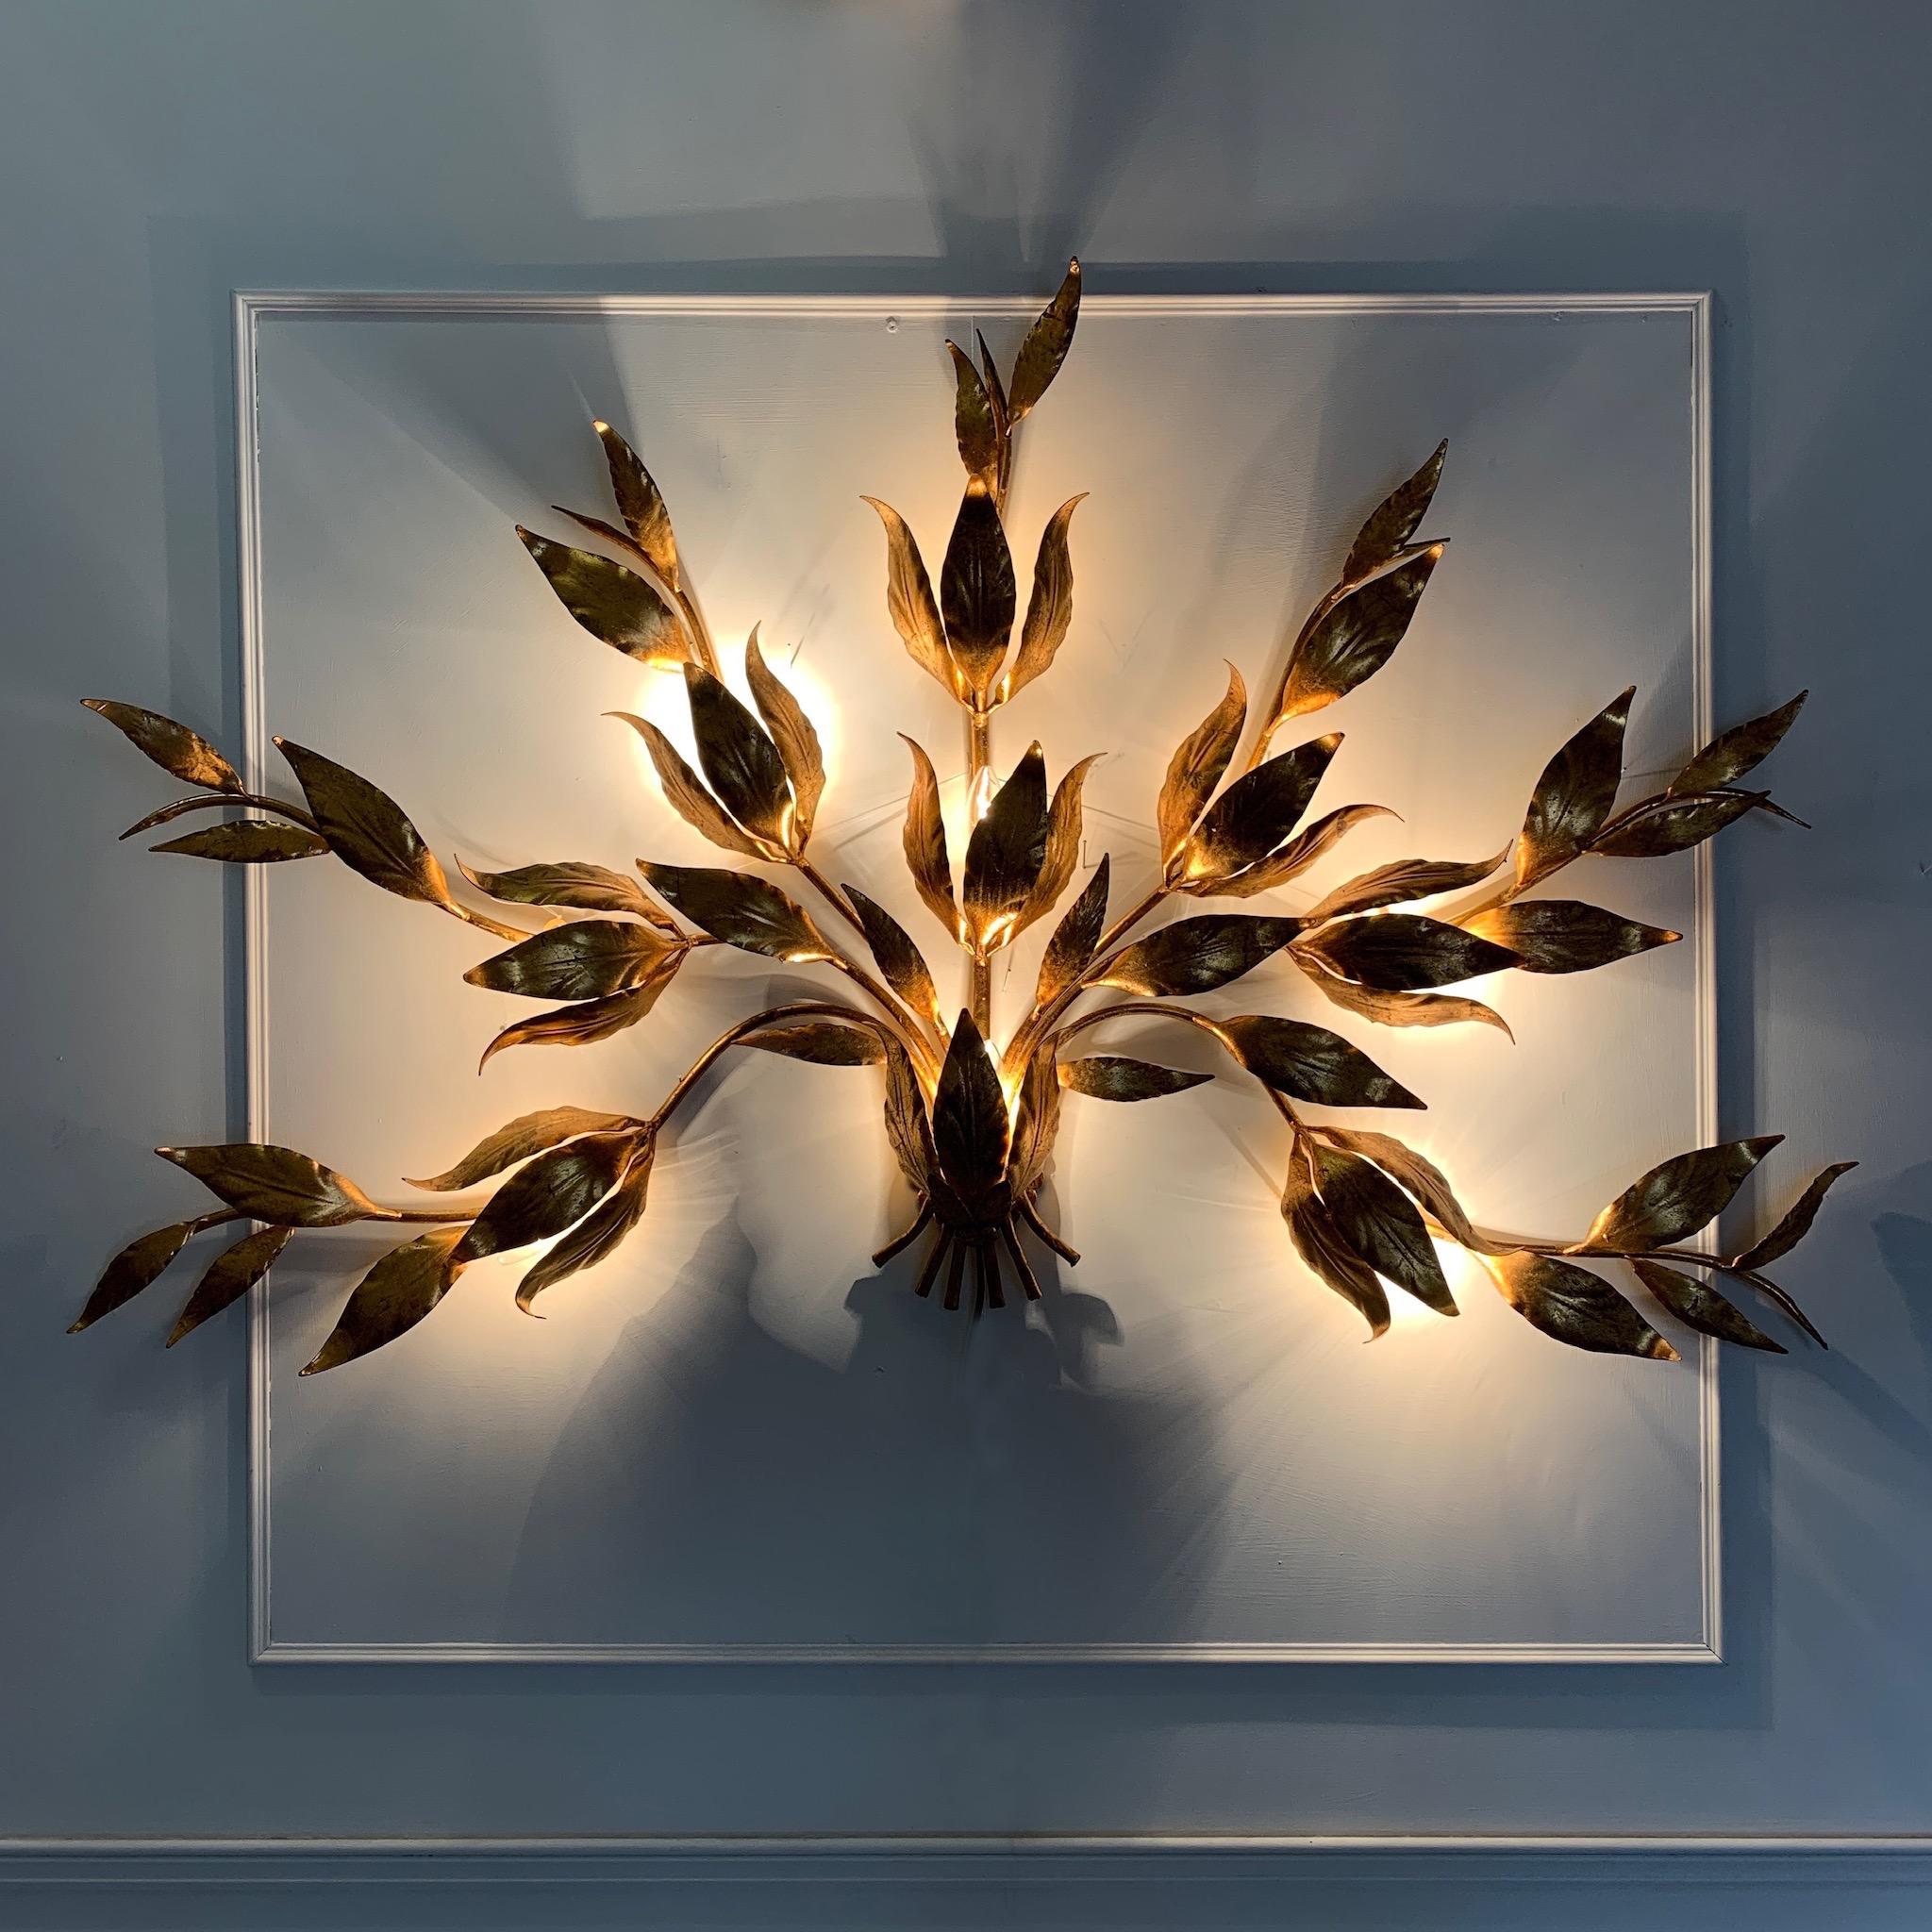 Monumental Hans Kogl leaf wall sconce, 1970s
Hans Kogl, Germany
This very large and beautiful leaf sconce is a real statement piece
There are 7 handcrafted curved gilt stems decorated fully with gilt leaves

Measures: 144cm width, 83cm height, 18cm